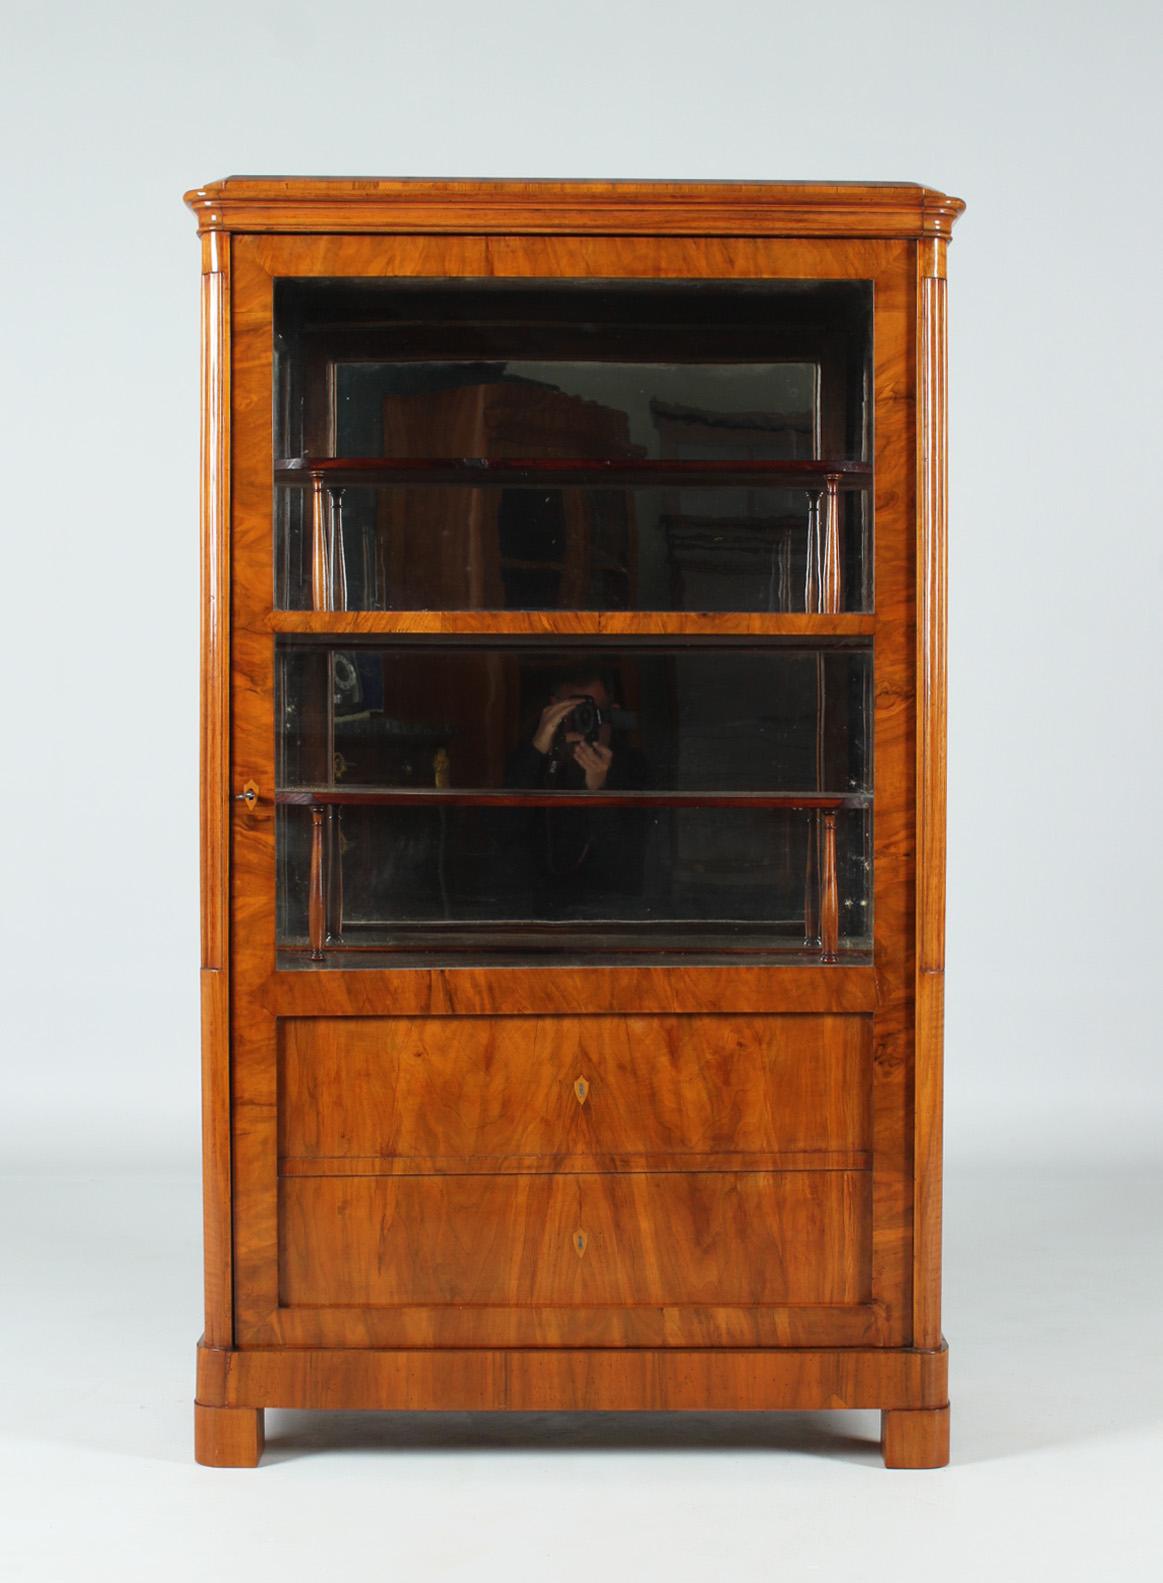 Dimensions: H x W x D: 155 x 93 x 45 cm. Depth of the shelves: 35 cm.

Beautiful antique display cabinet from the Biedermeier period around 1835.
The front of the piece of furniture is divided into two mock drawers in the lower part and two